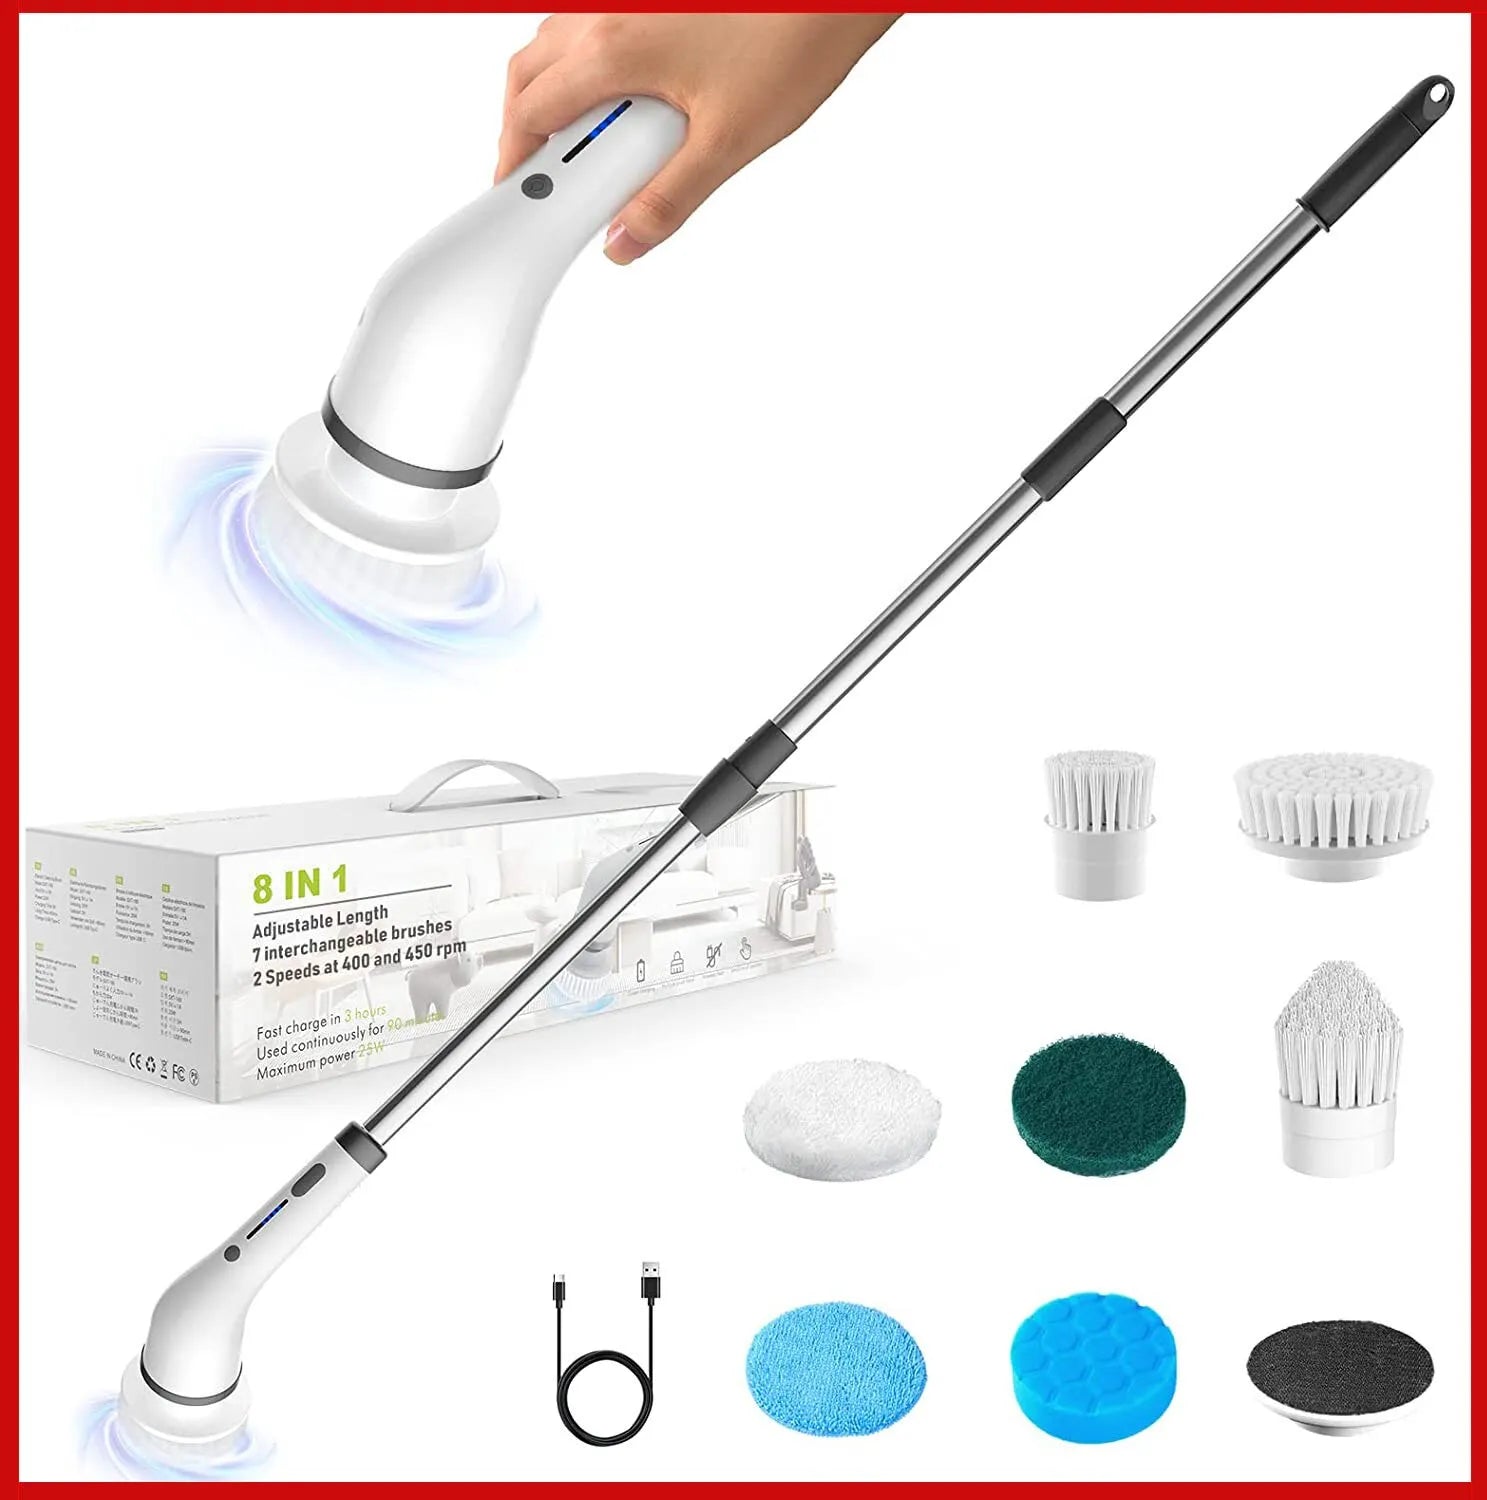 8-in-1 Multifunctional Electric Cleaning Brush USB Charging Bathroom Wash Brush Kitchen Cleaning Tool Household Cleaning Brush